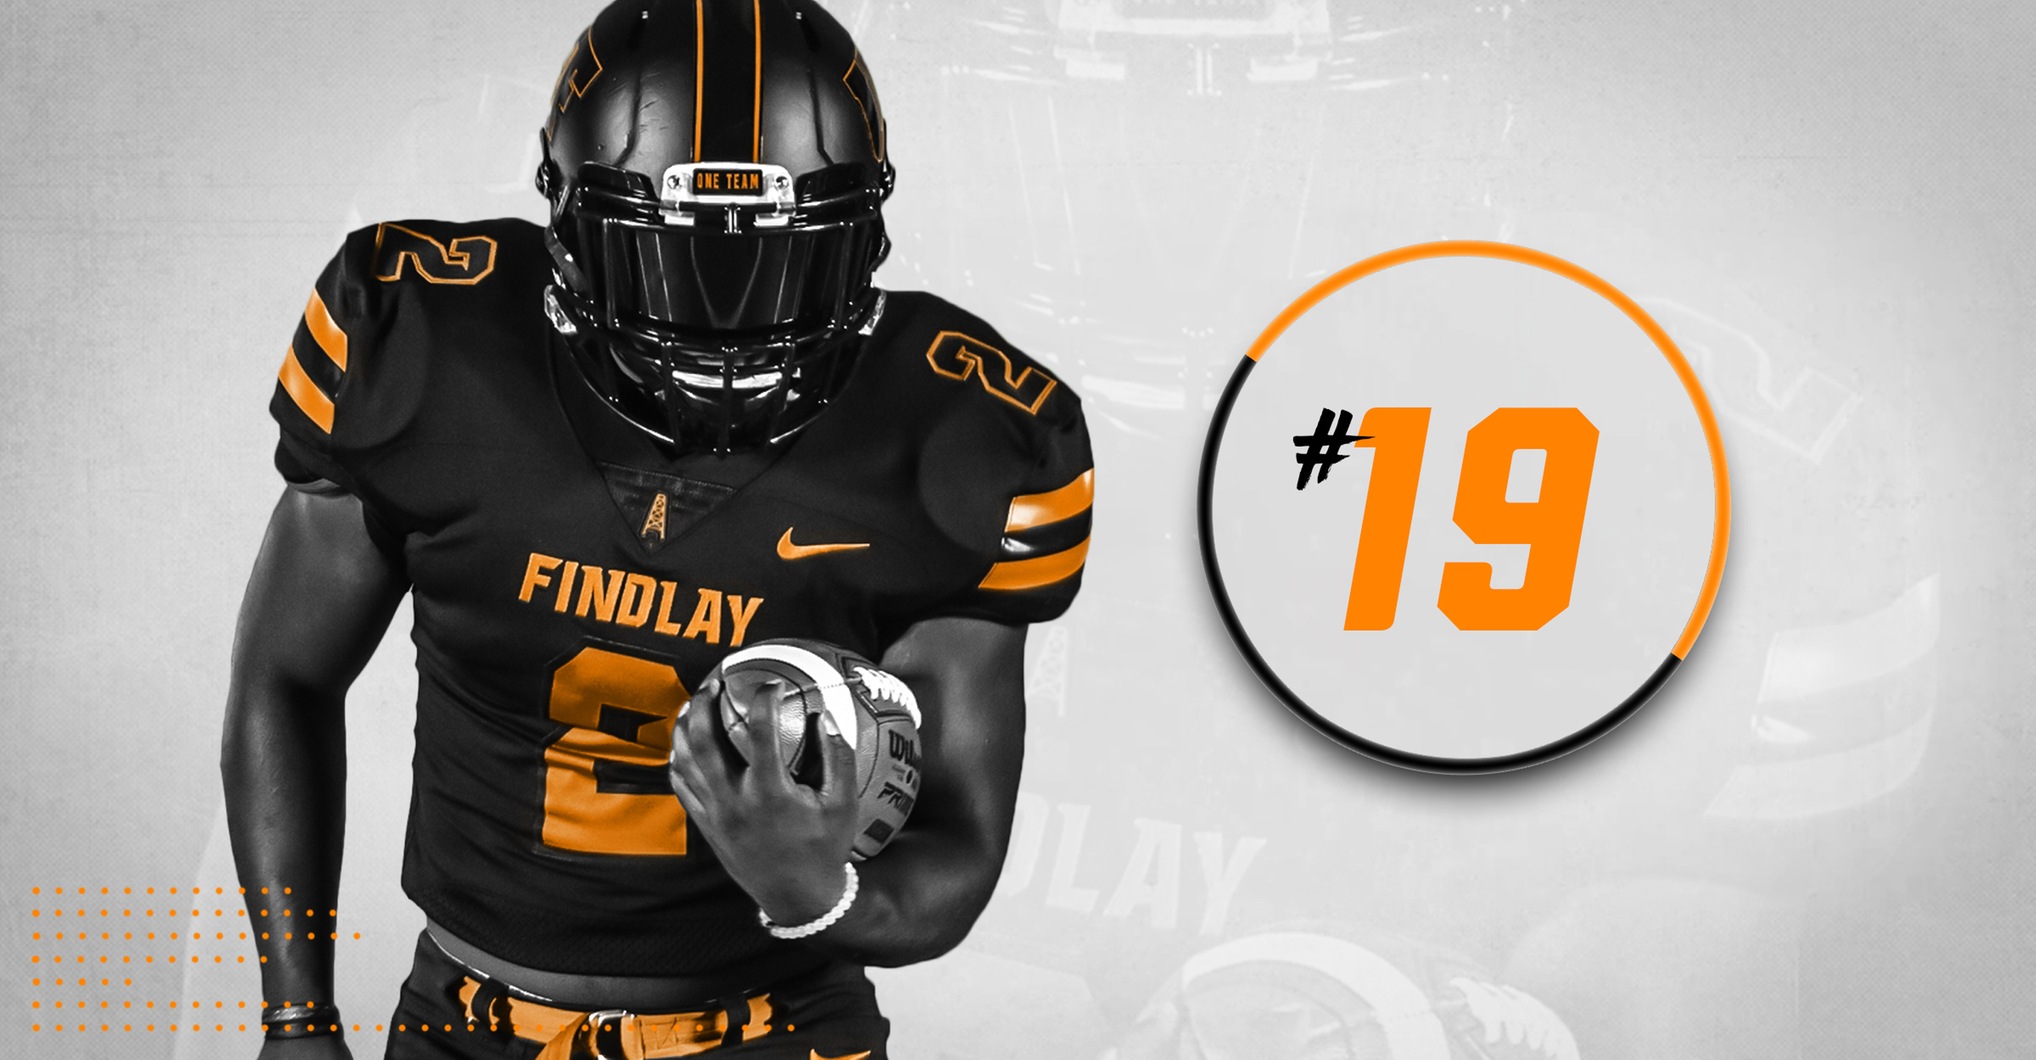 Oilers Jump Six Spots to No. 19 in AFCA Poll